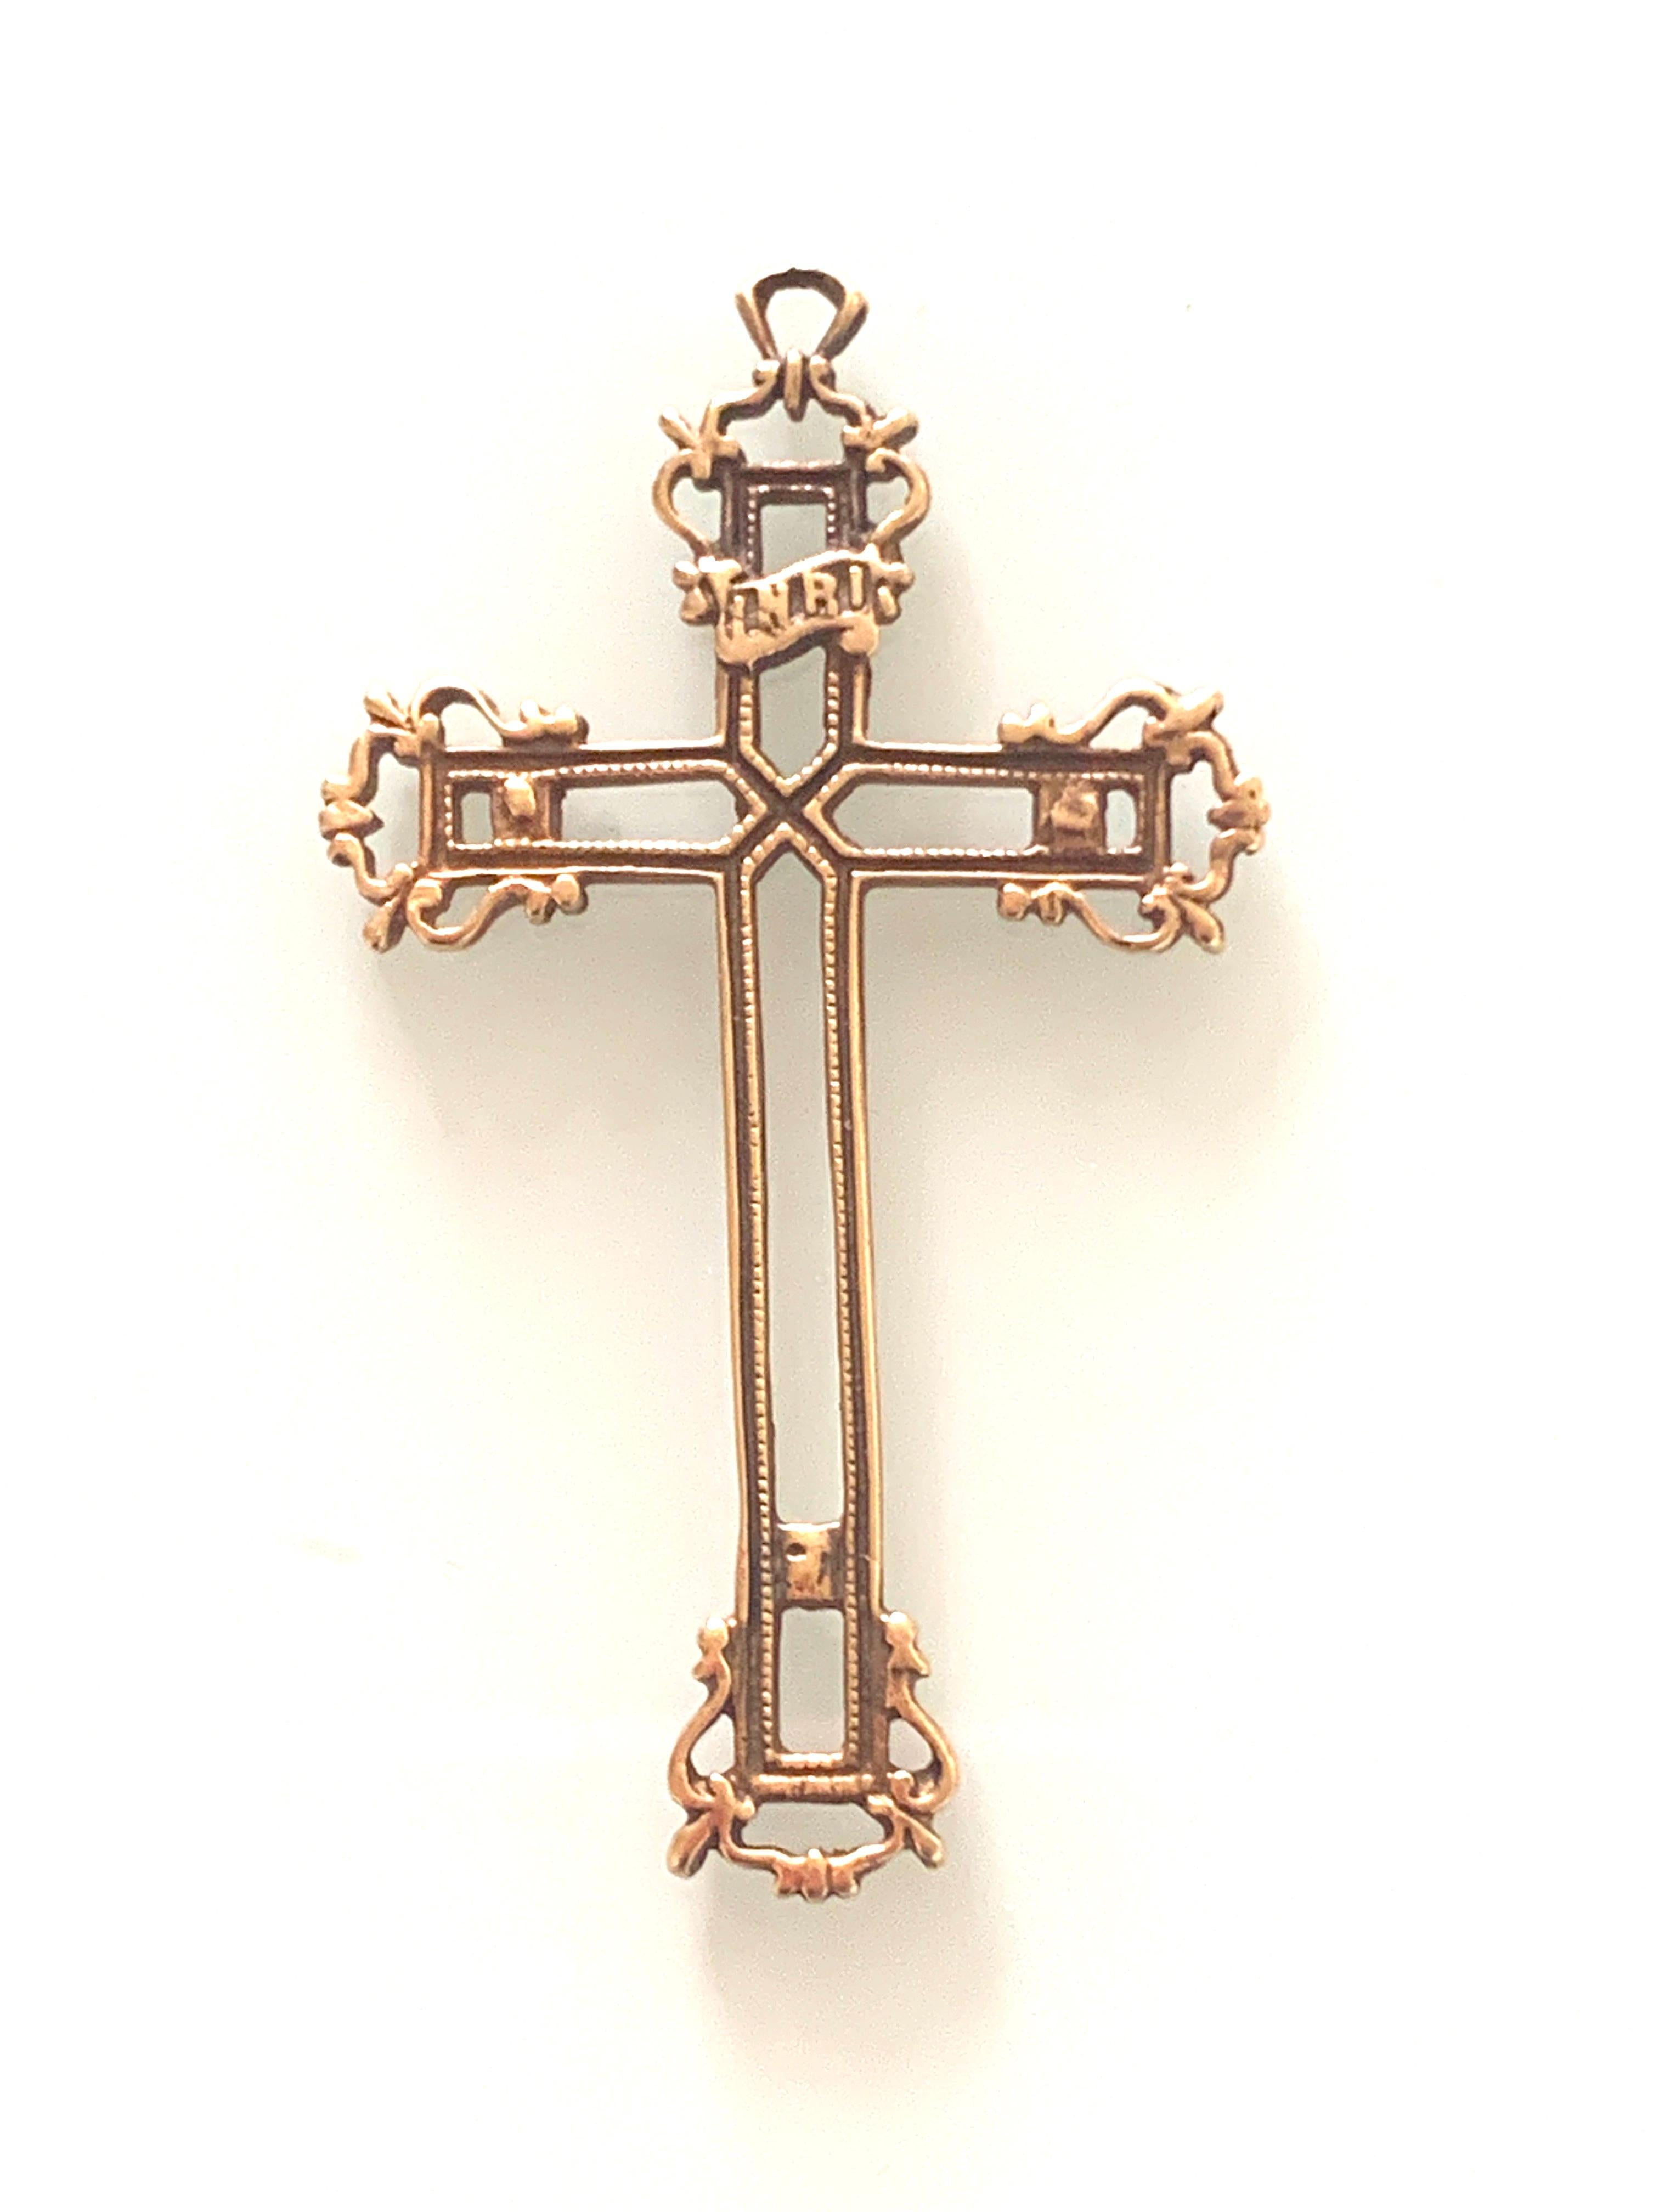 9ct Gold Huge Cross 
Dated 1974
Fully Hallmarked 
London 
Size 6.5 cm x 3.5cm
